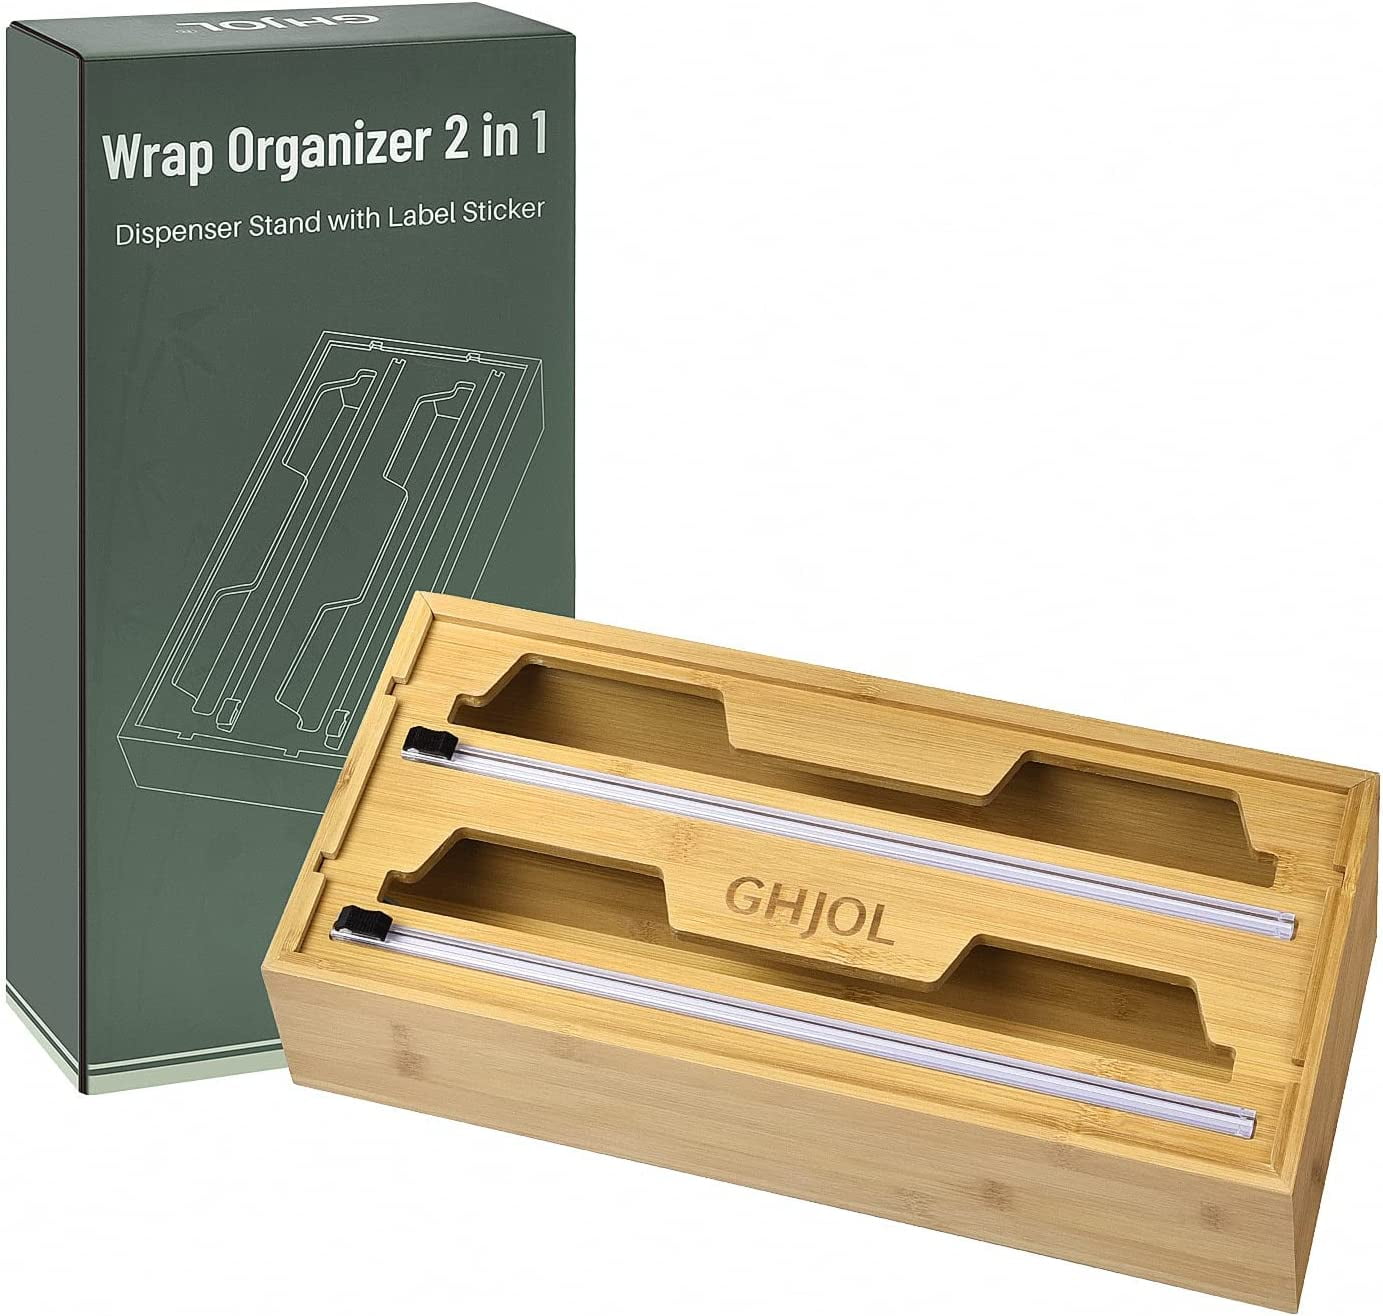 Engraved 3 in 1 Wax, Foil and Plastic Wrap Organizer, Plastic Wrap